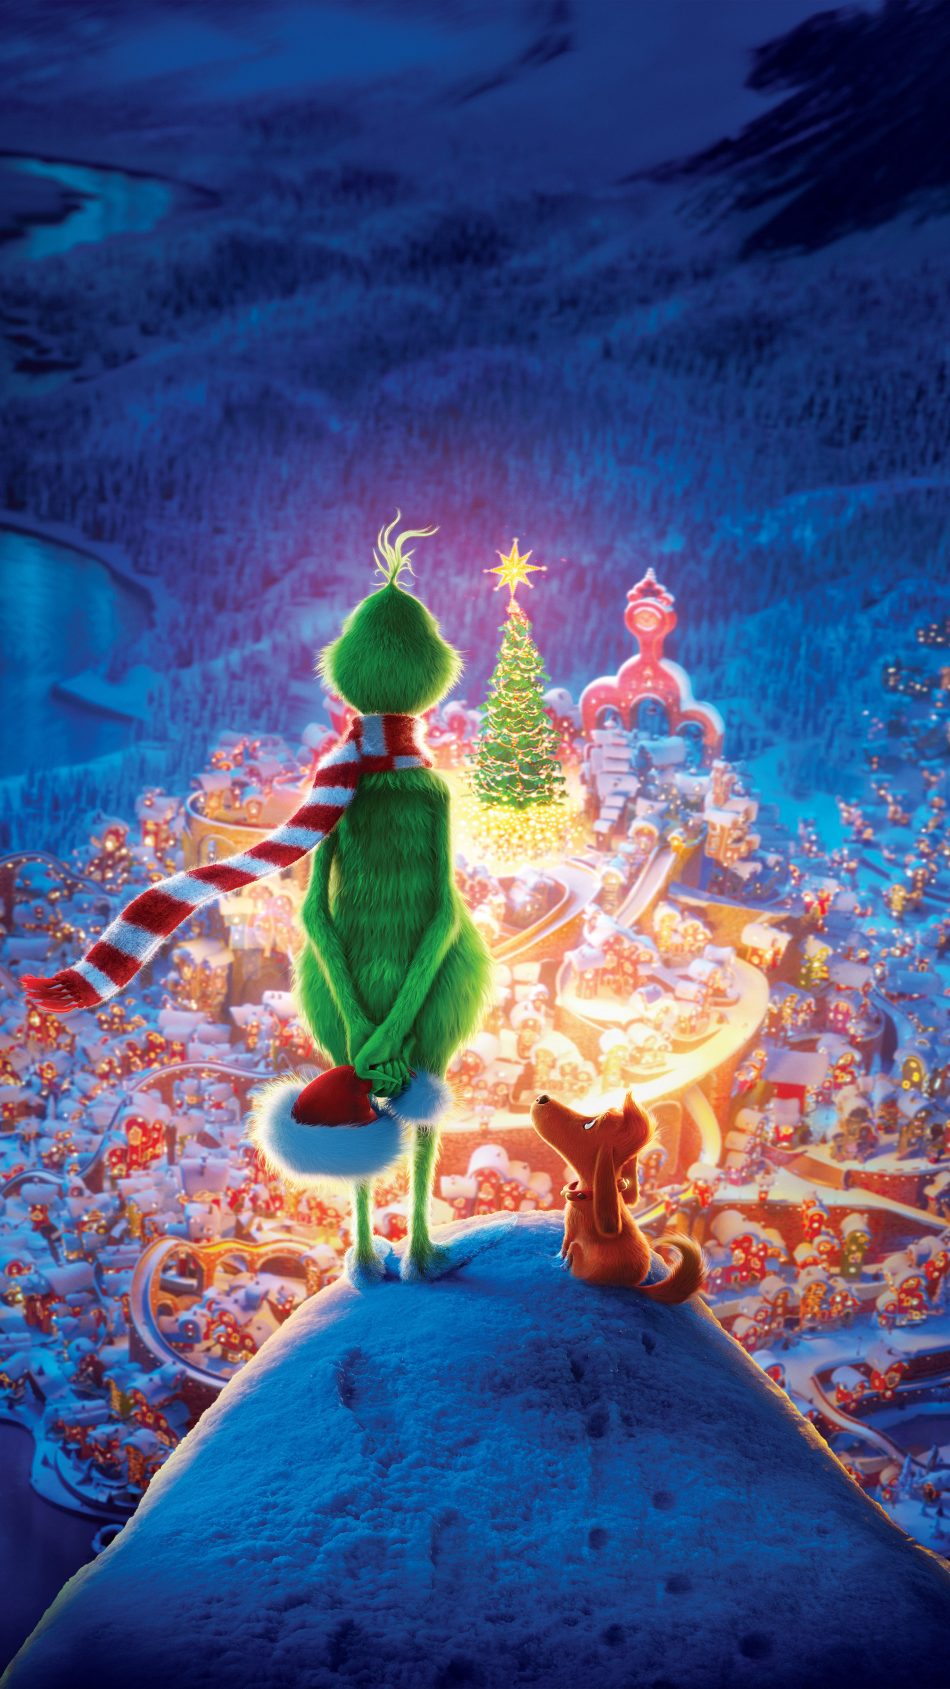 The Grinch Animation 2018 4K Ultra HD Mobile Wallpaper